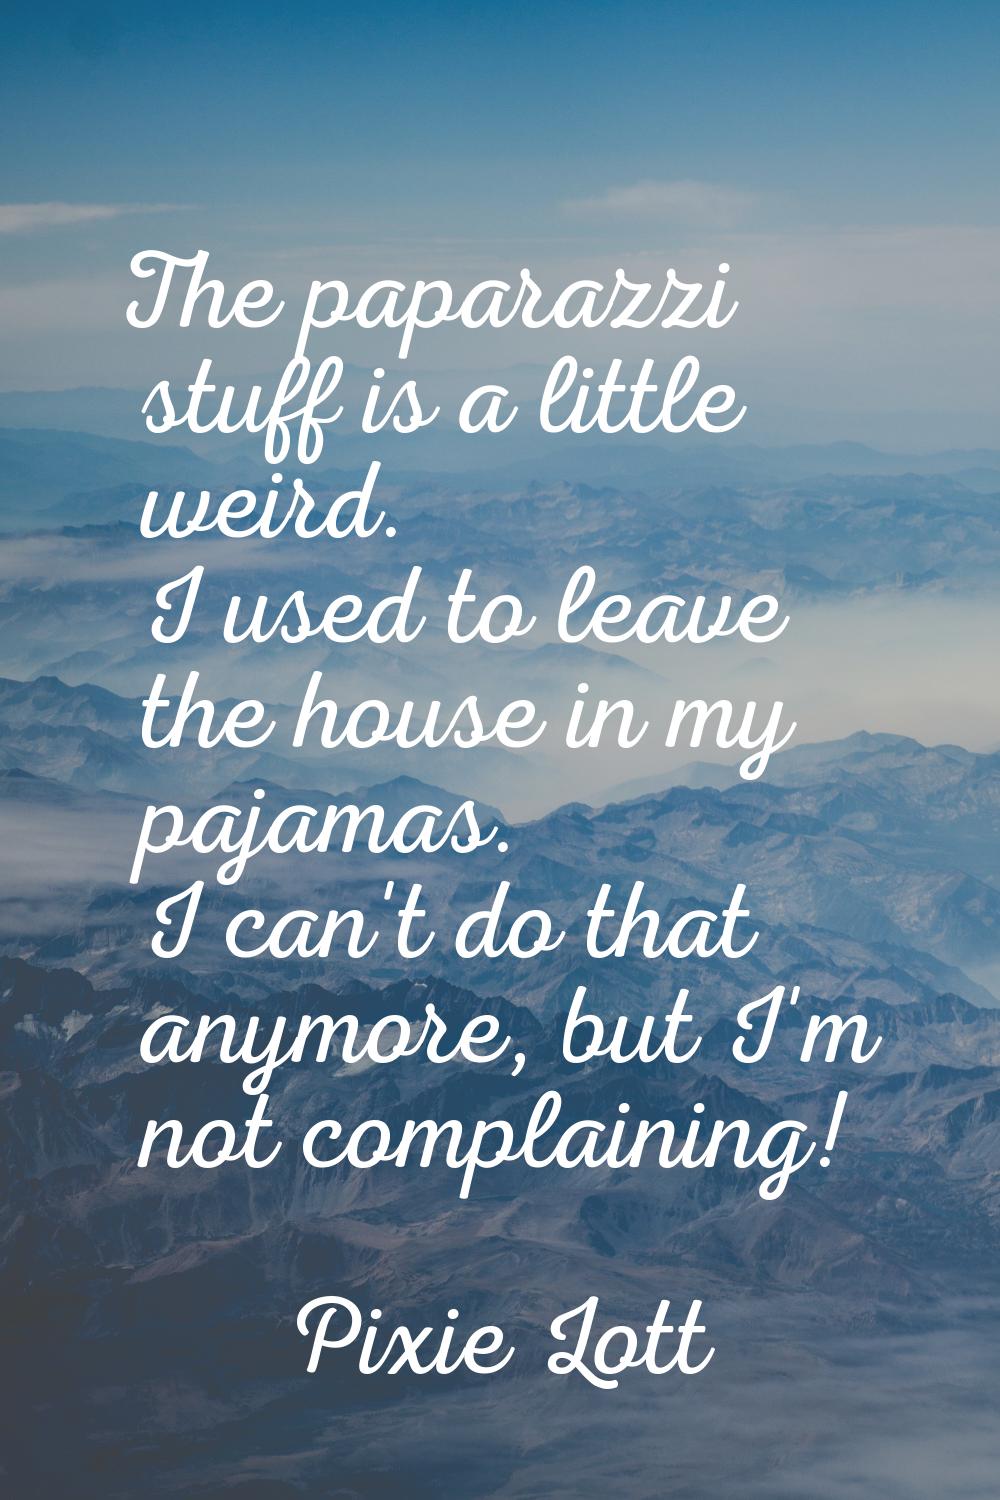 The paparazzi stuff is a little weird. I used to leave the house in my pajamas. I can't do that any